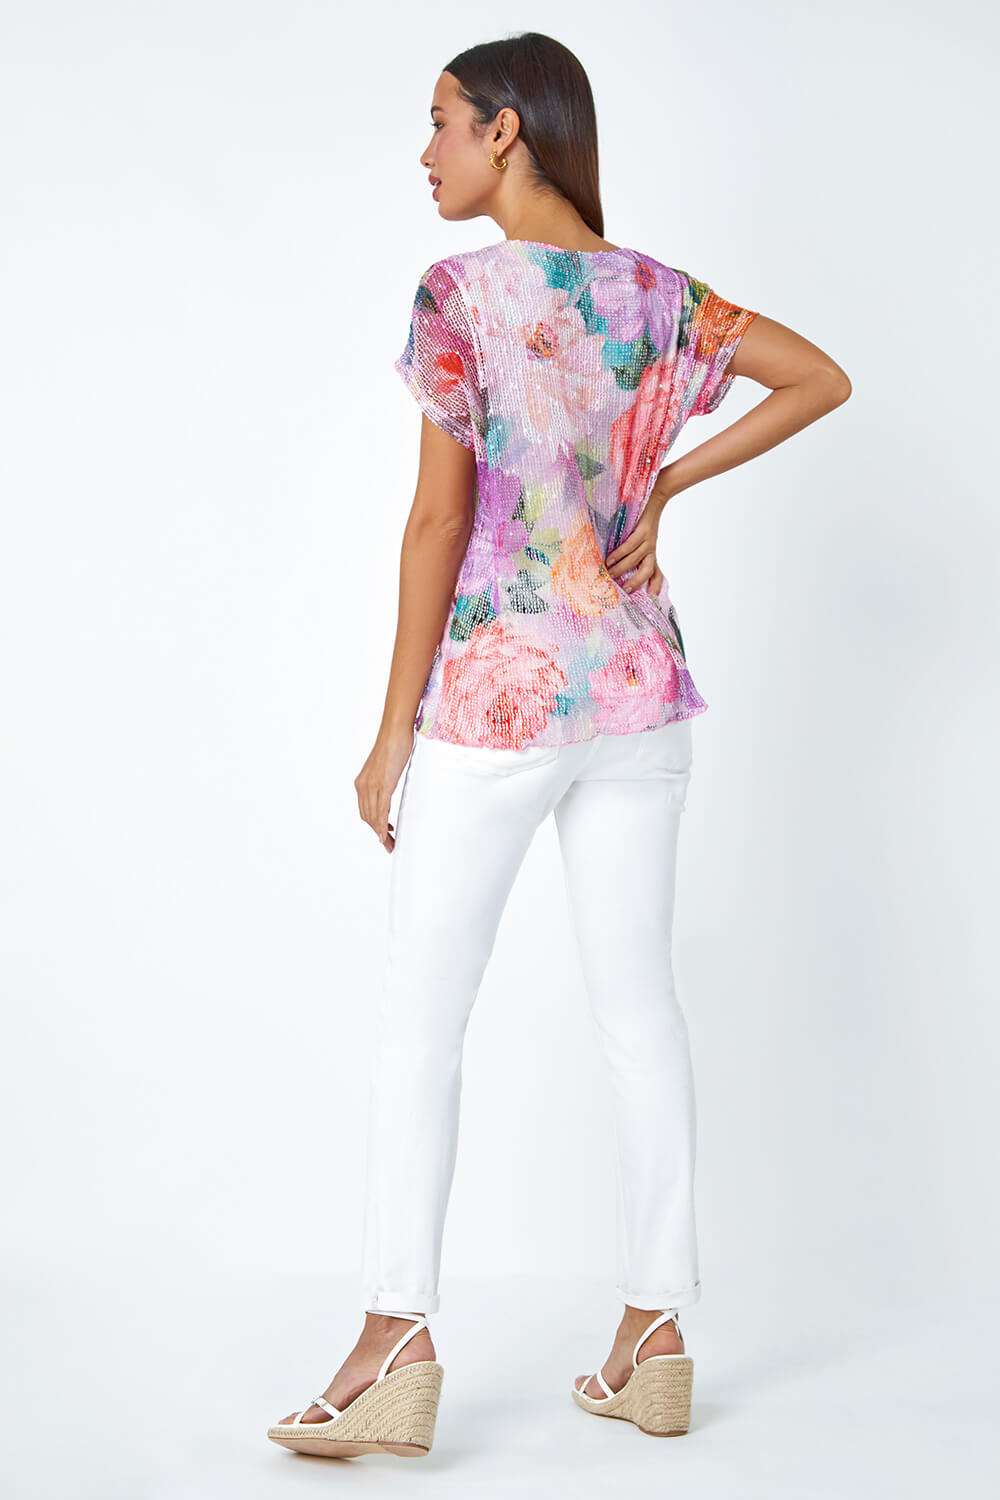 PINK Mesh Overlay Floral Print T-Shirt, Image 3 of 5